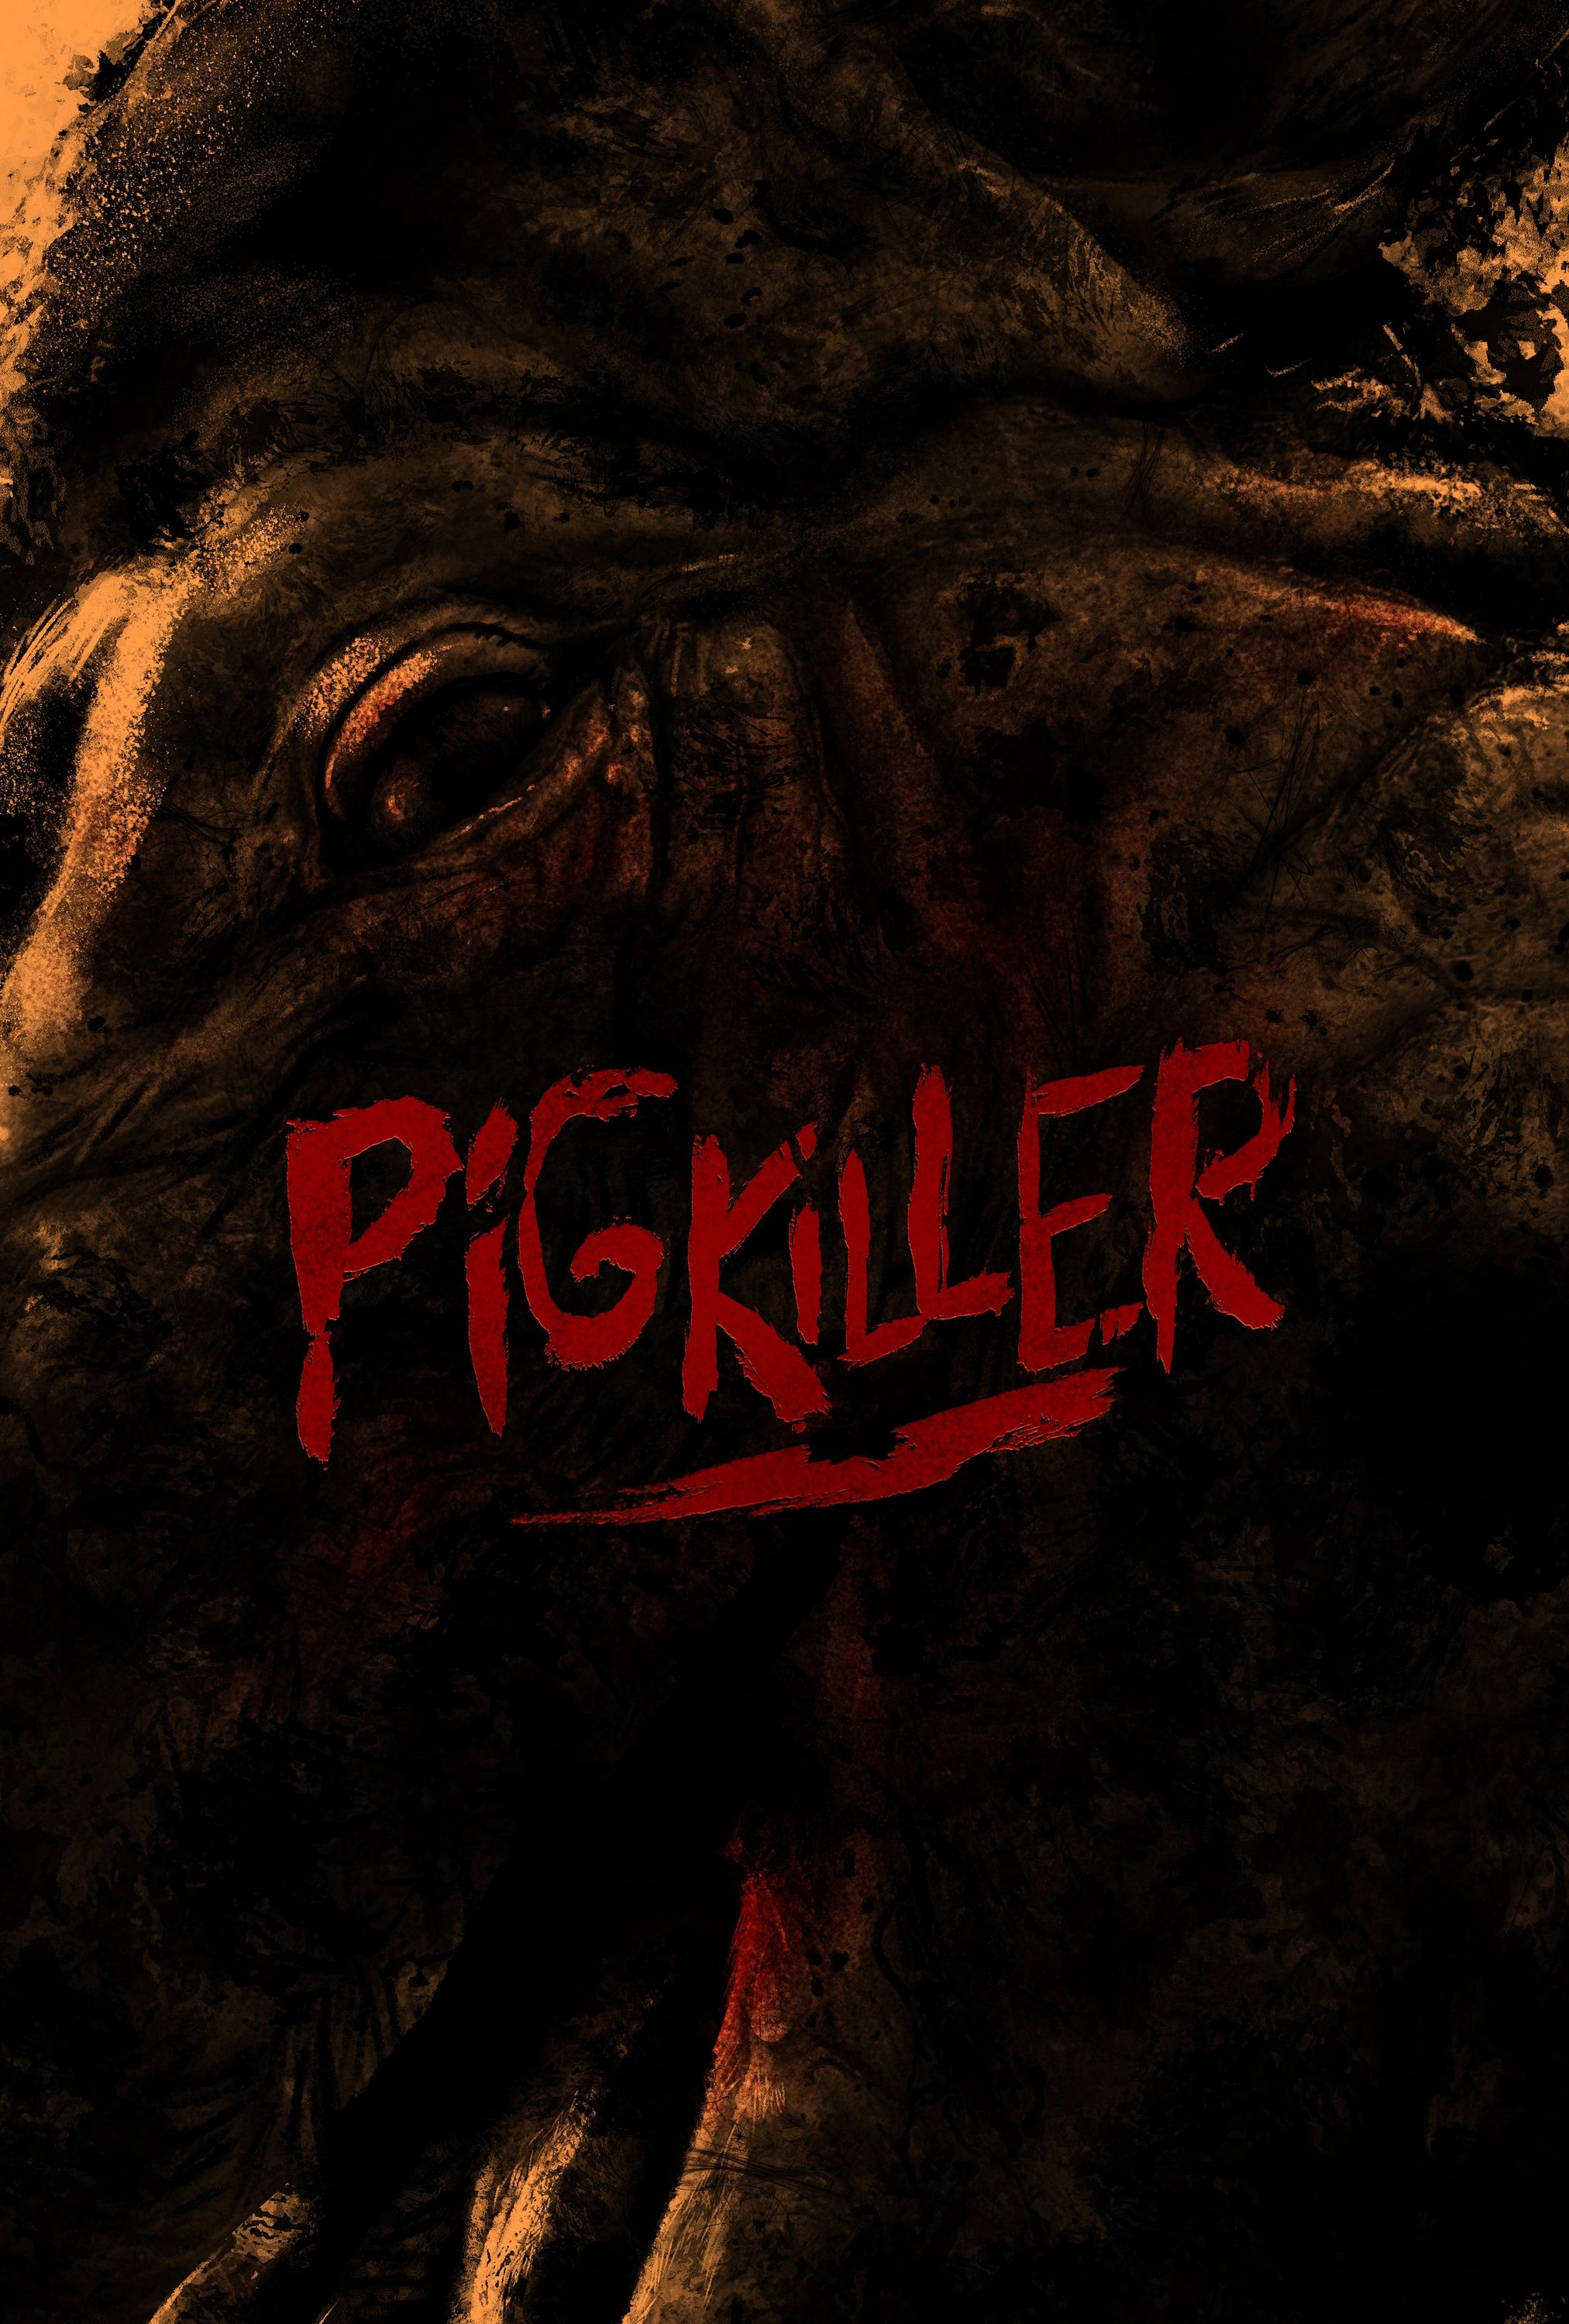 Pig Killer 2022 Tamil Unofficial Dubbed 1xBet